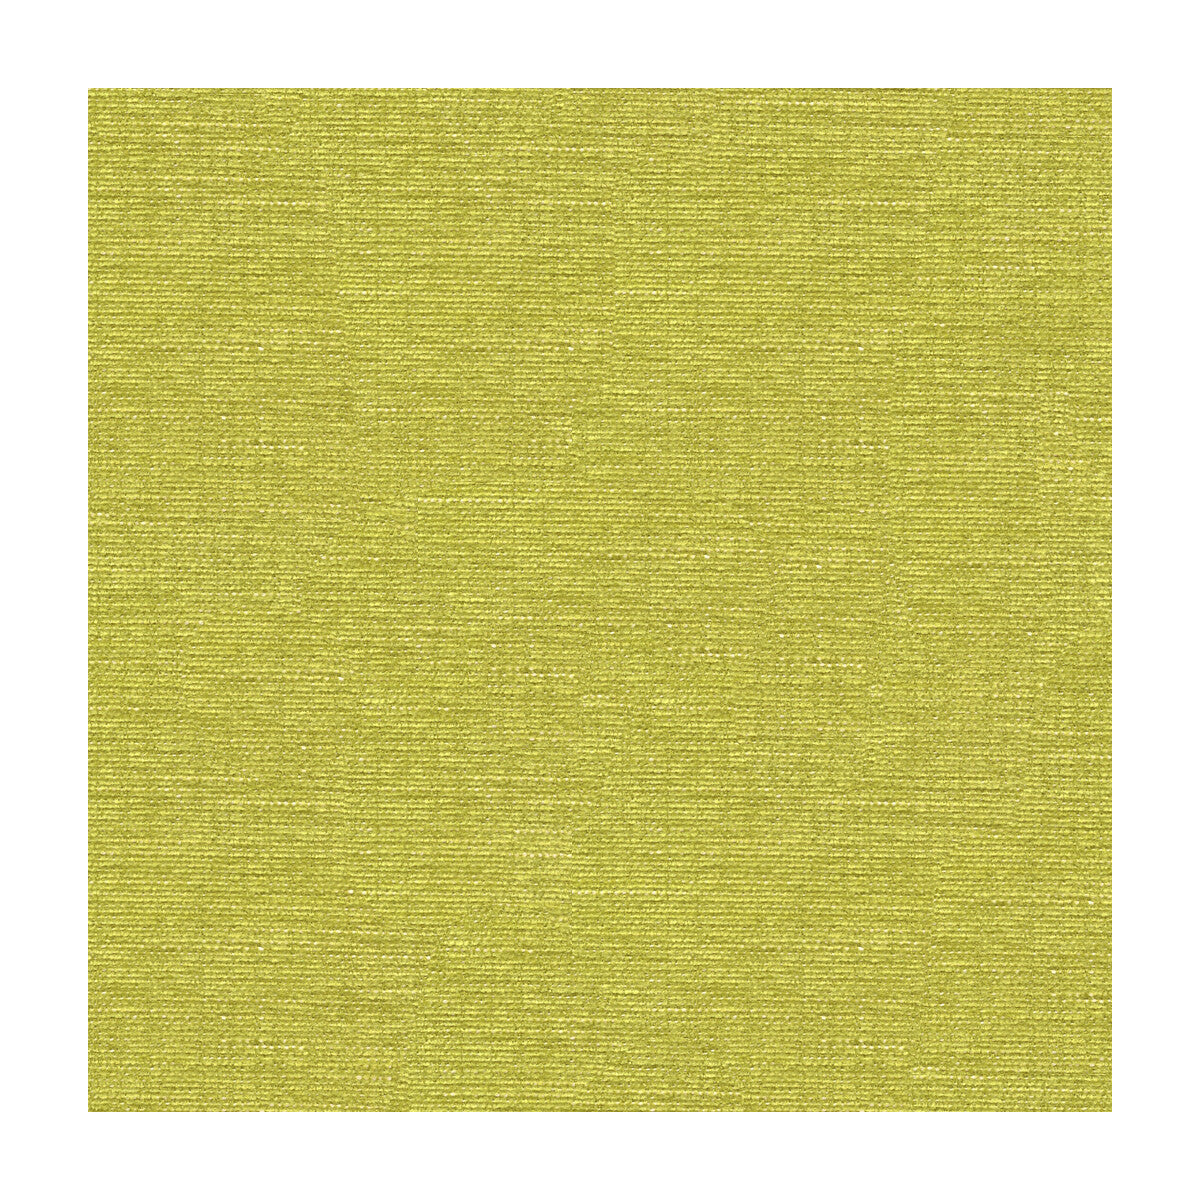 Beacon fabric in lime color - pattern 34182.3.0 - by Kravet Contract in the Crypton Incase collection